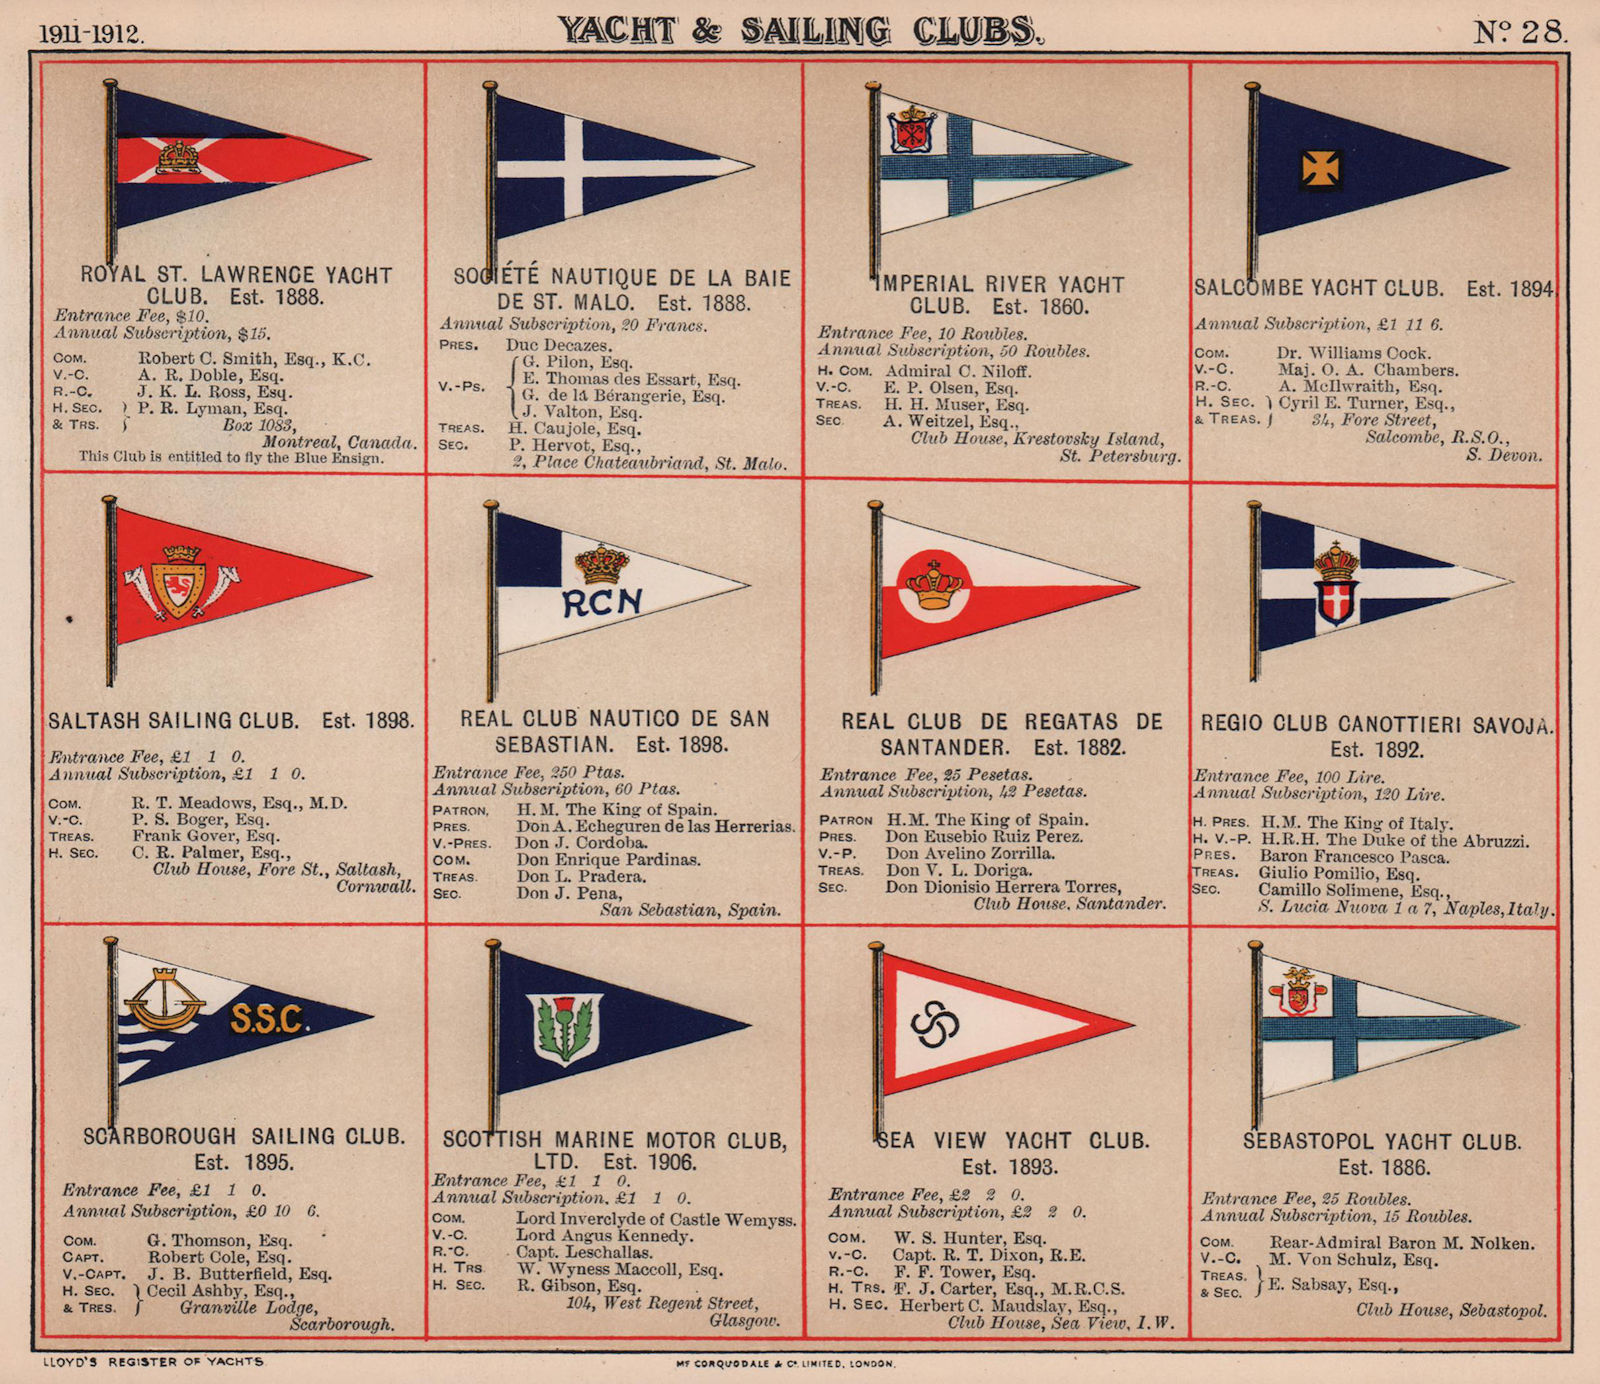 YACHT/SAILING CLUB FLAGS R-S St Lawrence/Malo Salcombe Saltash Scarborough 1911